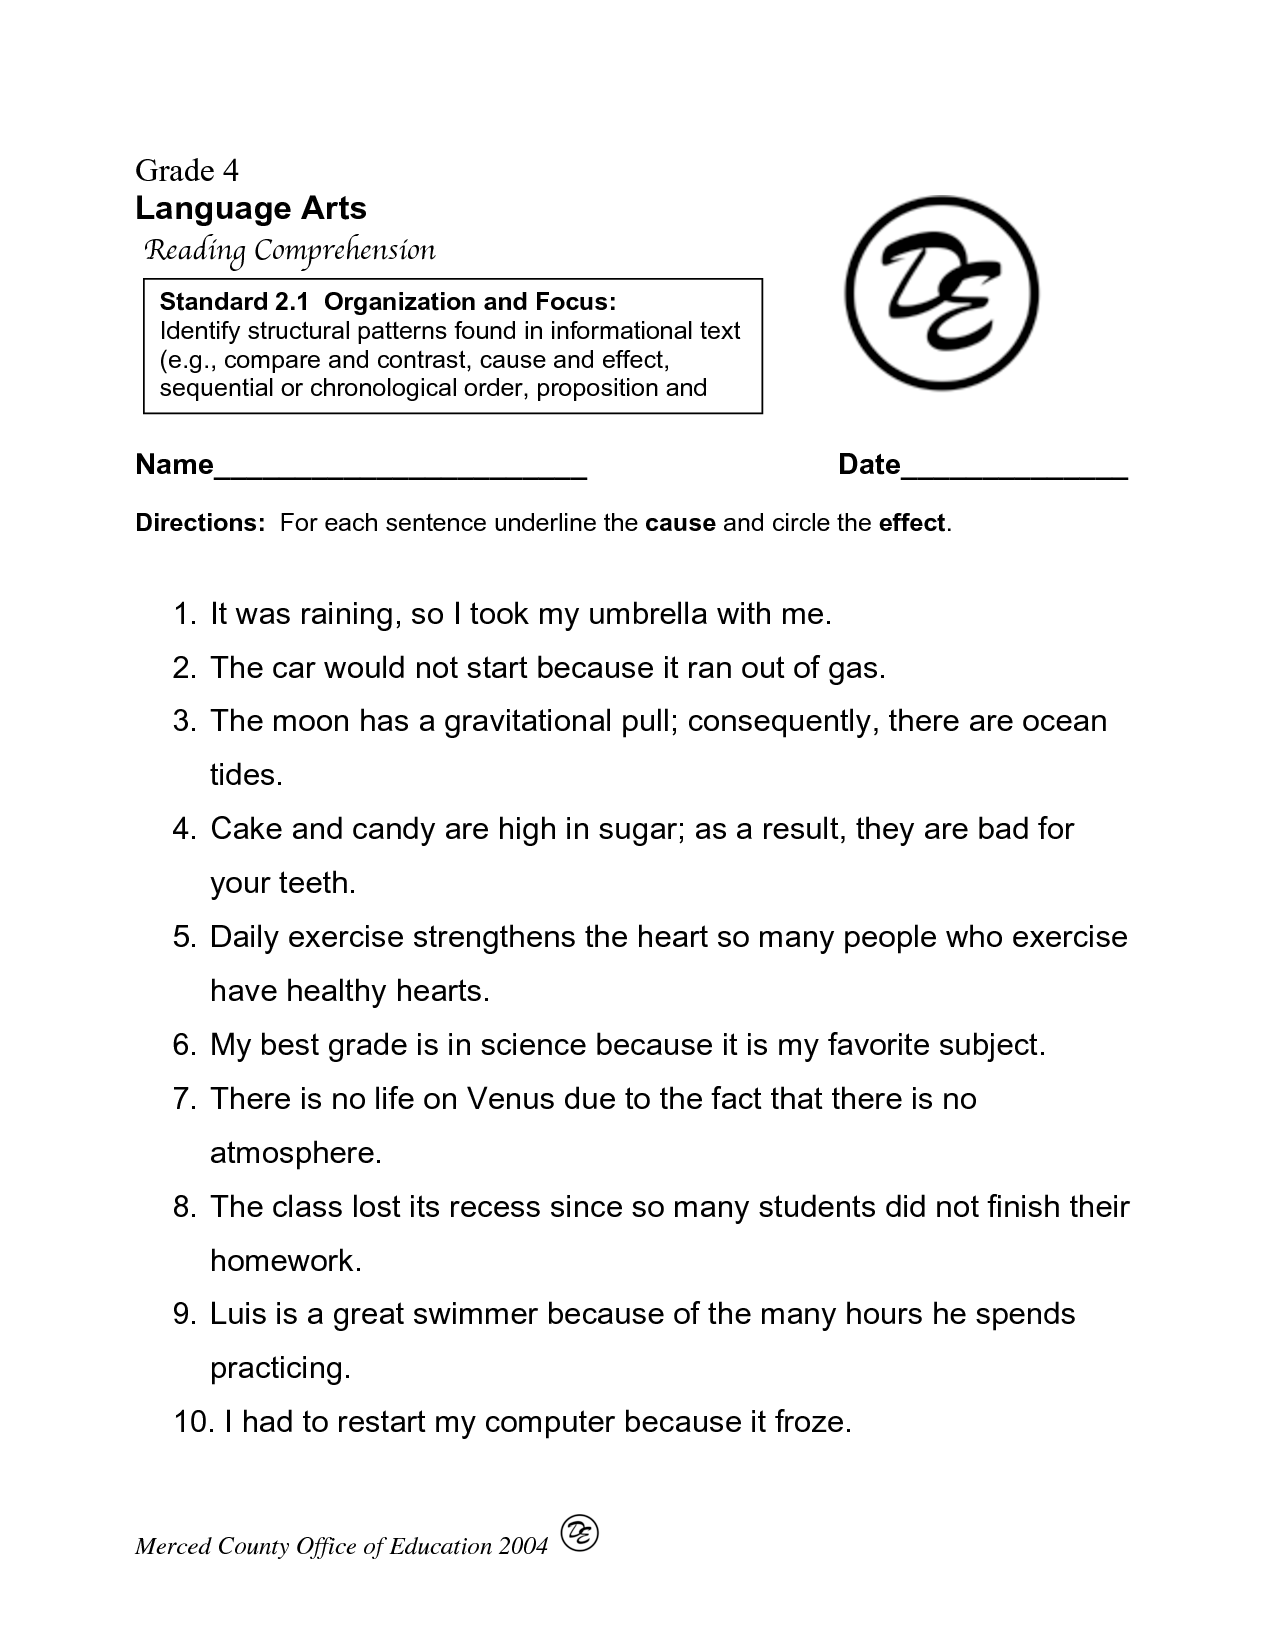 15-best-images-of-cause-effect-reading-comprehension-worksheets-cause